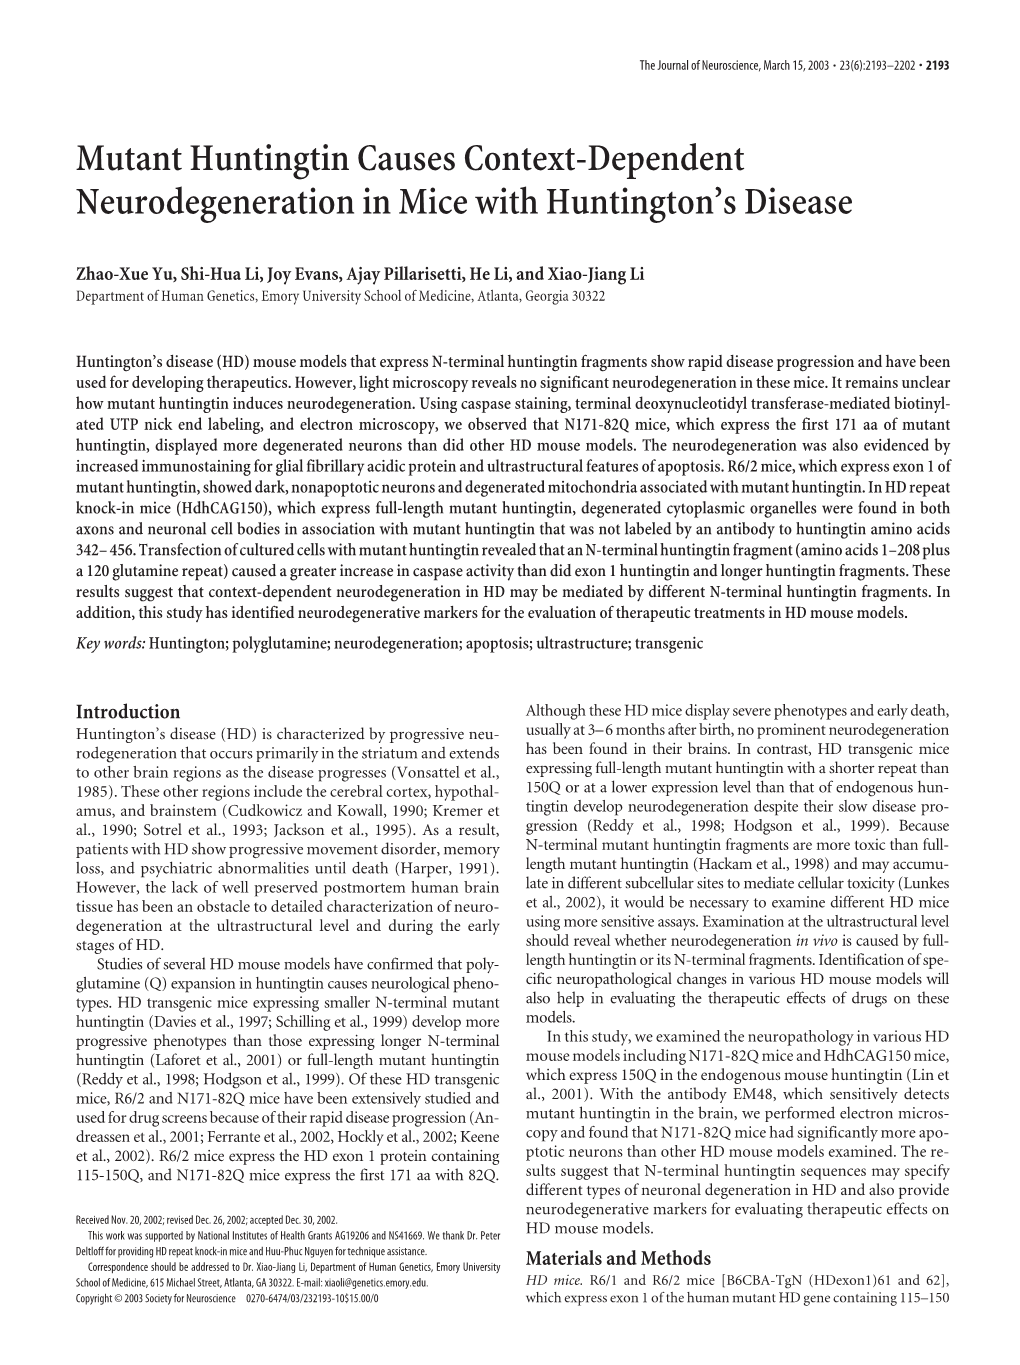 Mutant Huntingtin Causes Context-Dependent Neurodegeneration in Mice with Huntington’S Disease